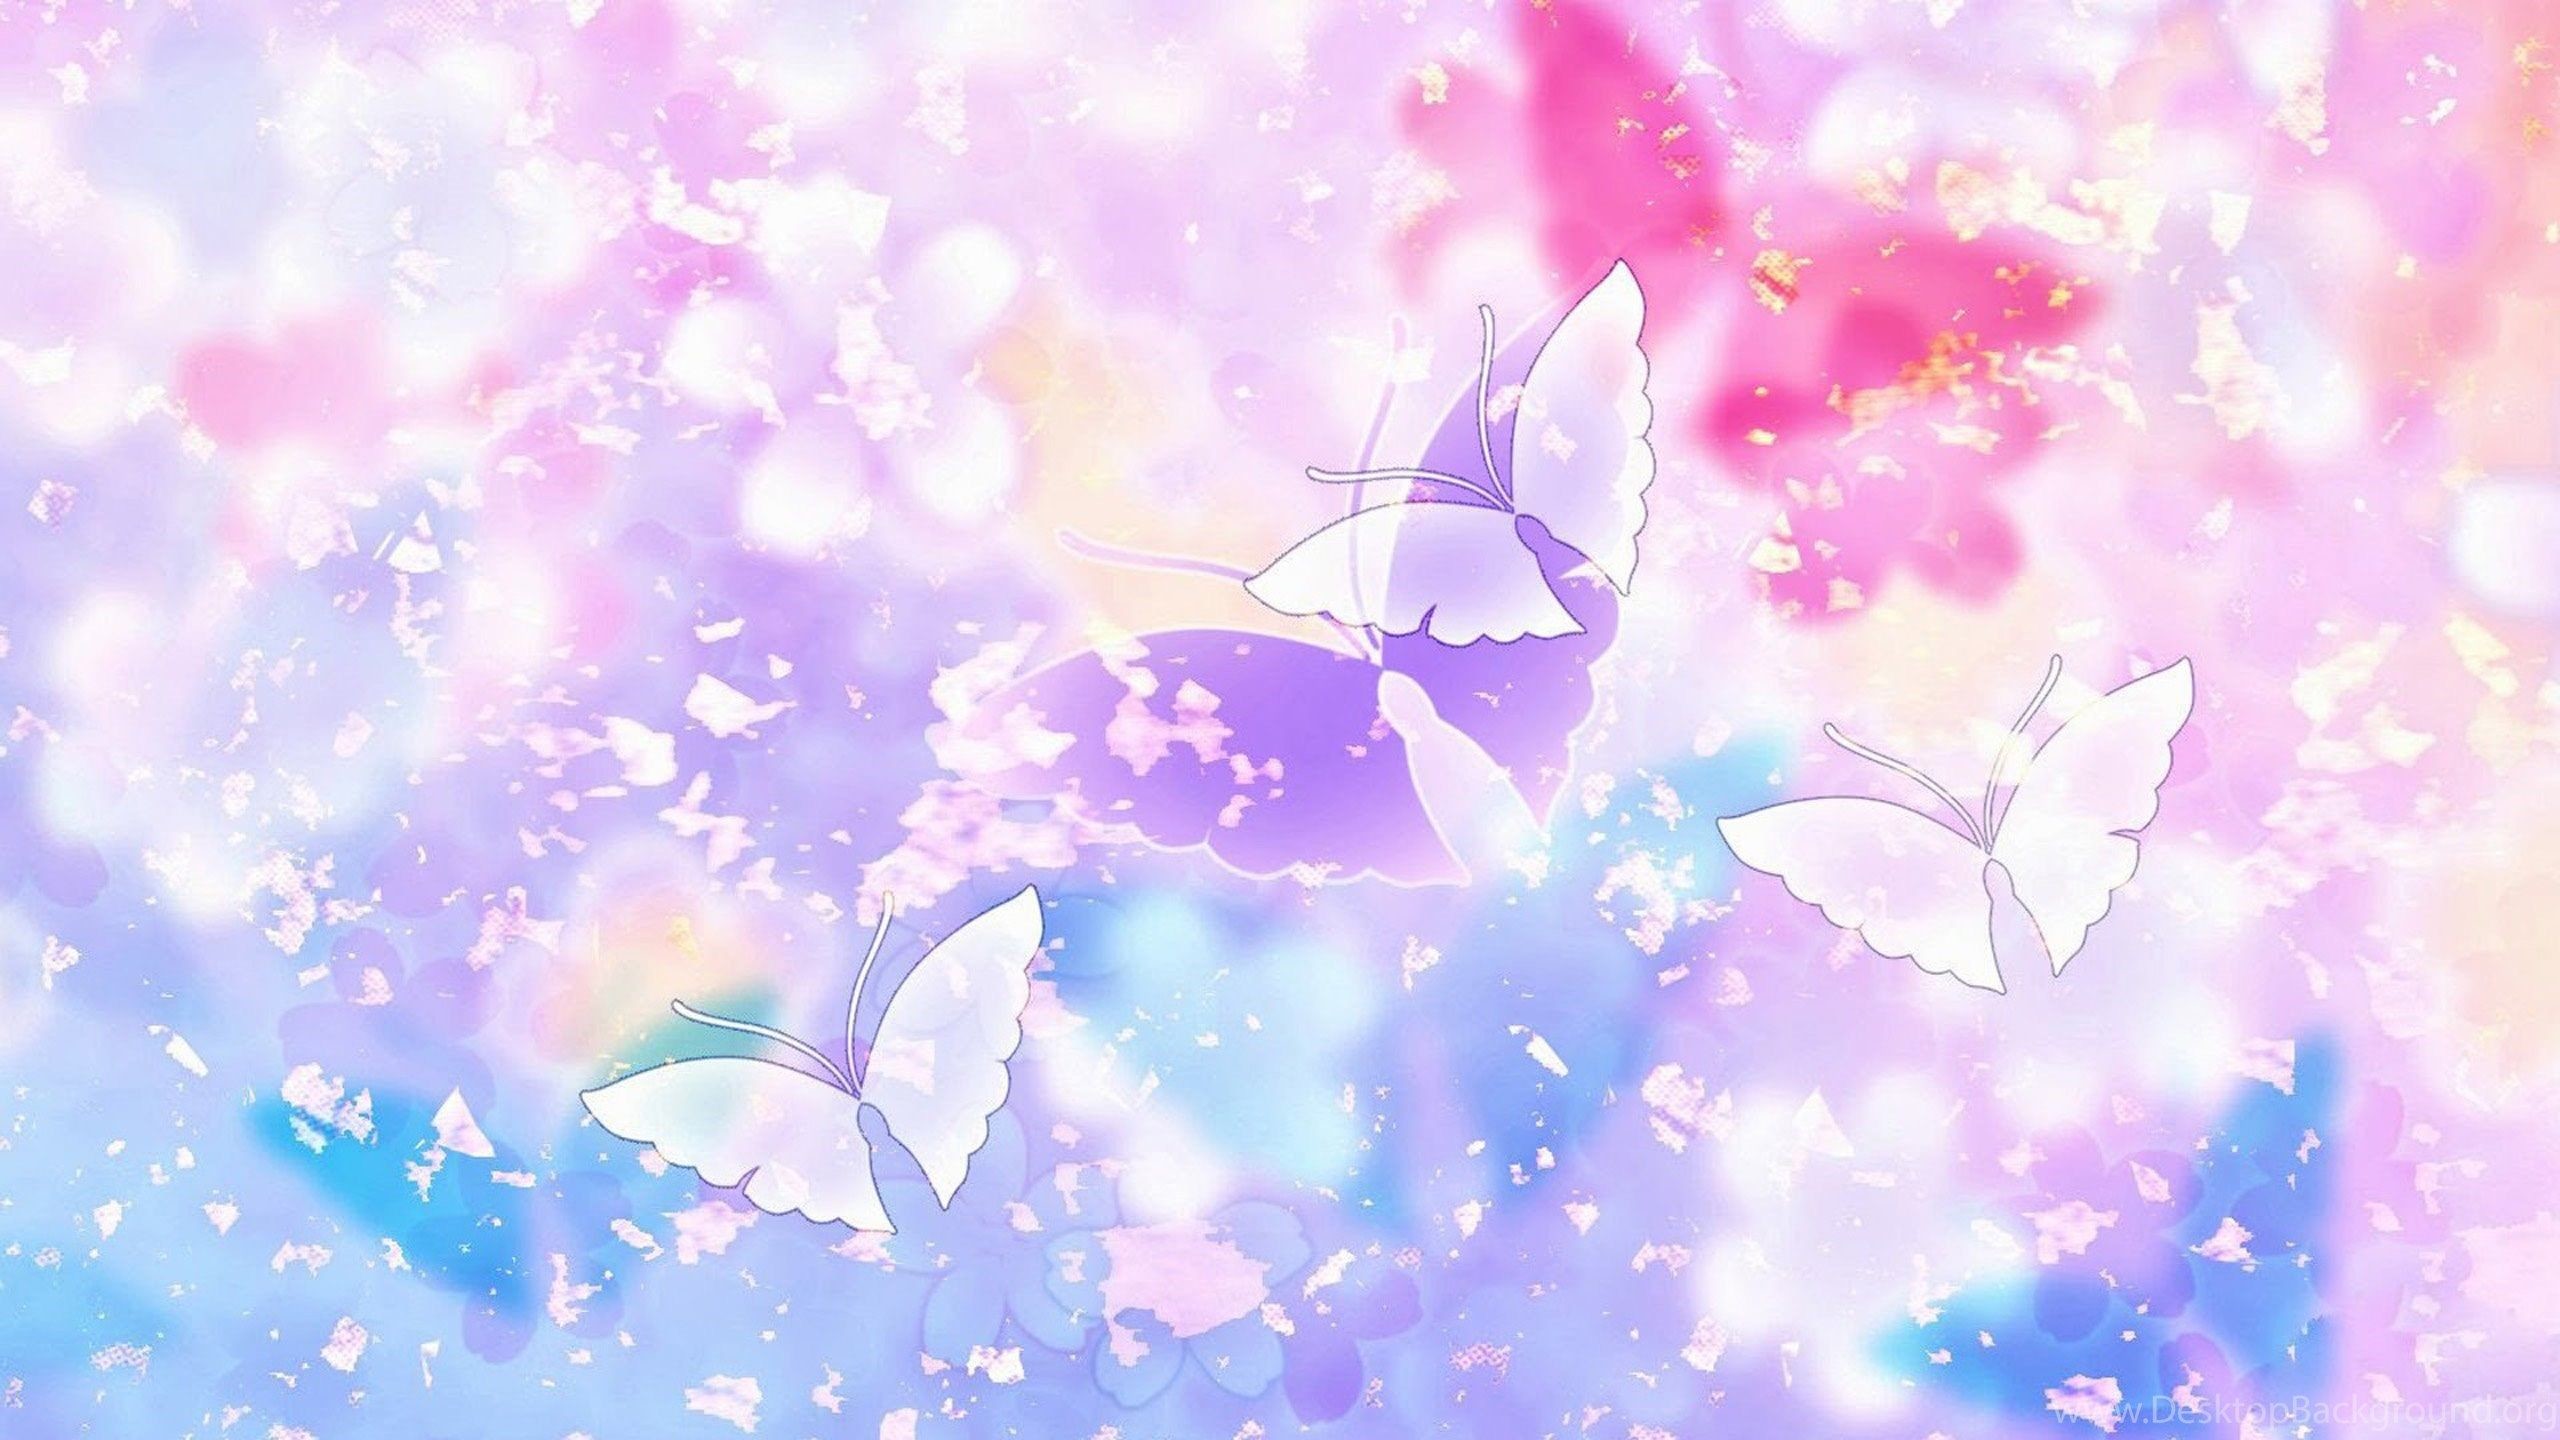 2560x1440 1920x1080 Abstract Butterfly 336926 - WallDevil">